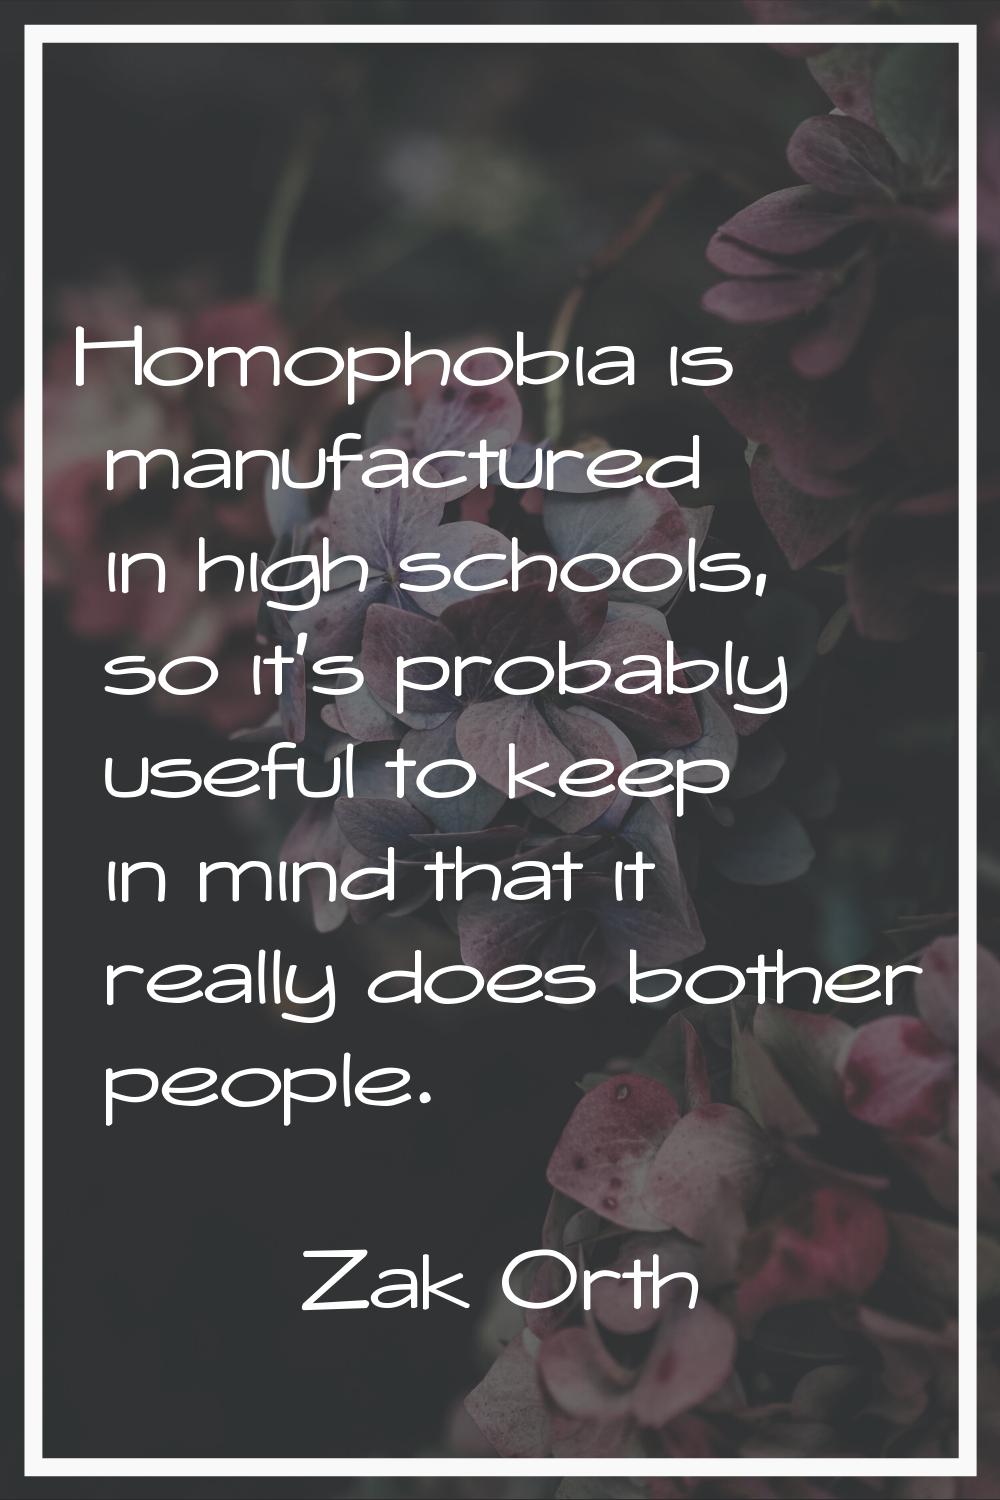 Homophobia is manufactured in high schools, so it's probably useful to keep in mind that it really 